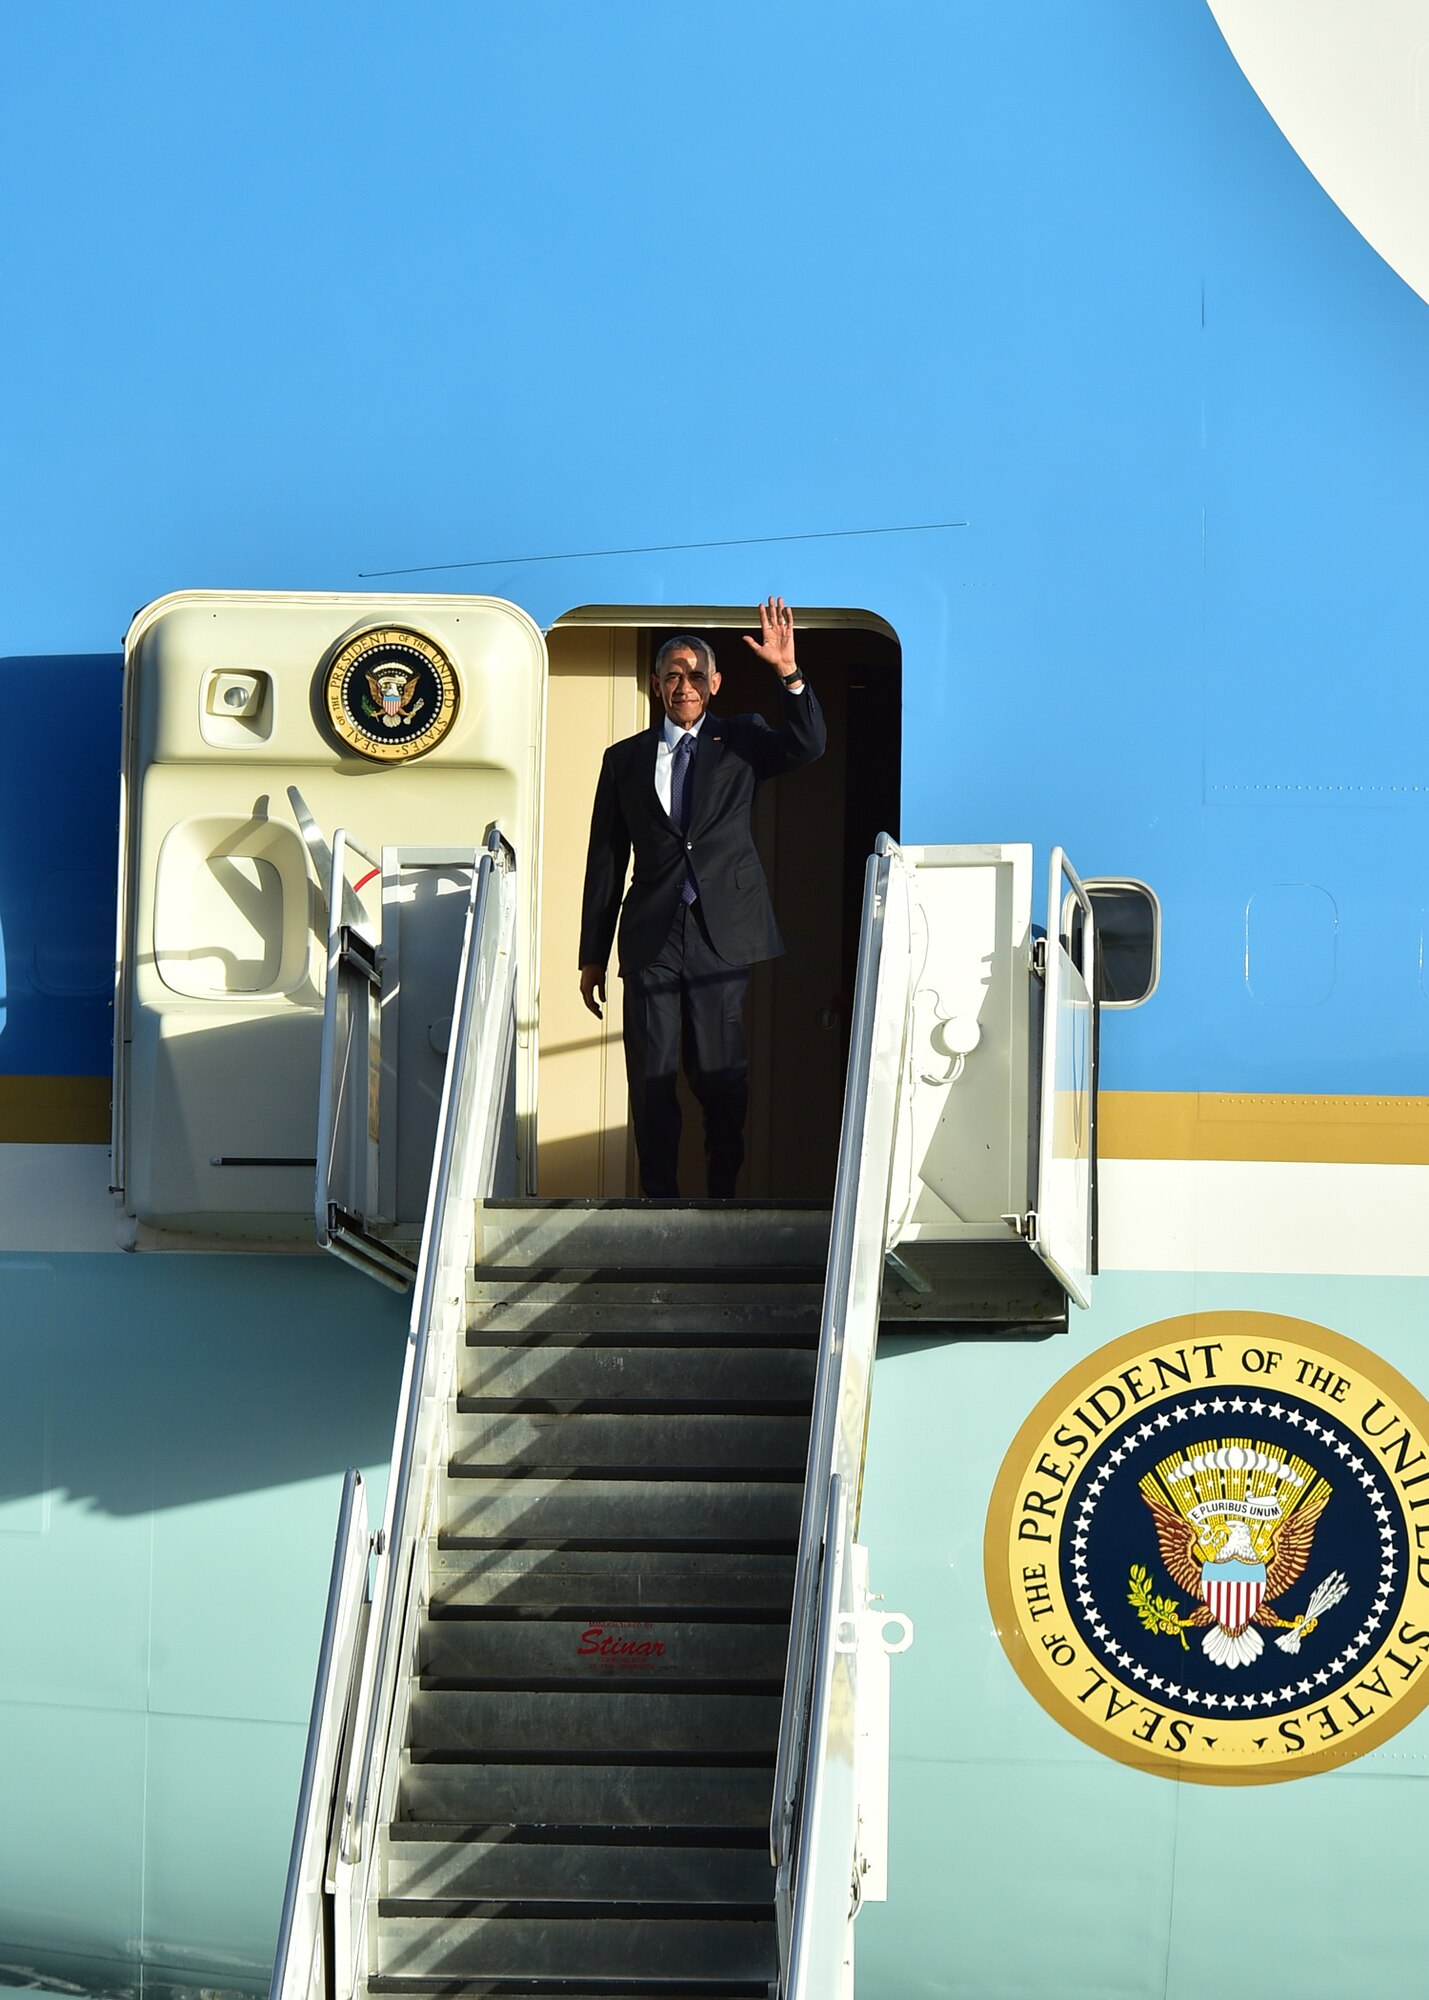 President Barack Obama waves as he exits Air Force One after arriving on Joint Base Pearl Harbor-Hickam, Hawaii, Aug. 31, 2016. President Obama was in Hawaii to speak at the Pacific Island Conference of Leaders and the International Union for Conservation of Nature World Conservation Congress. (U.S. Air Force Photo by Tech. Sgt. Aaron Oelrich/Released) 

